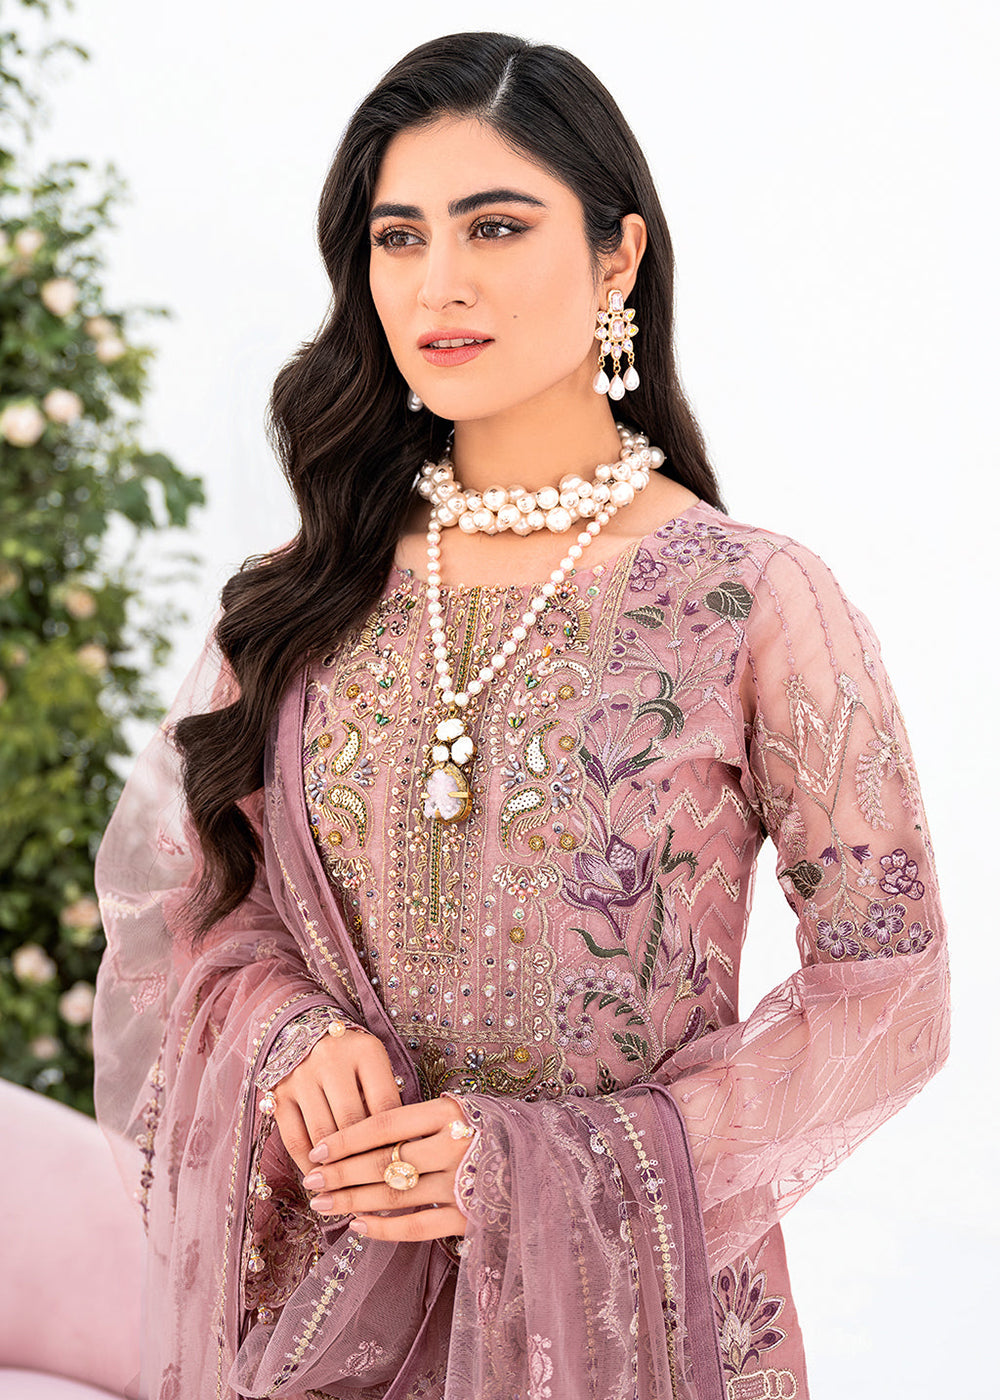 Buy Now Pink Organza Suit - Ramsha Minhal Collection Vol 8 - #M-804 Online in USA, UK, Canada & Worldwide at Empress Clothing.